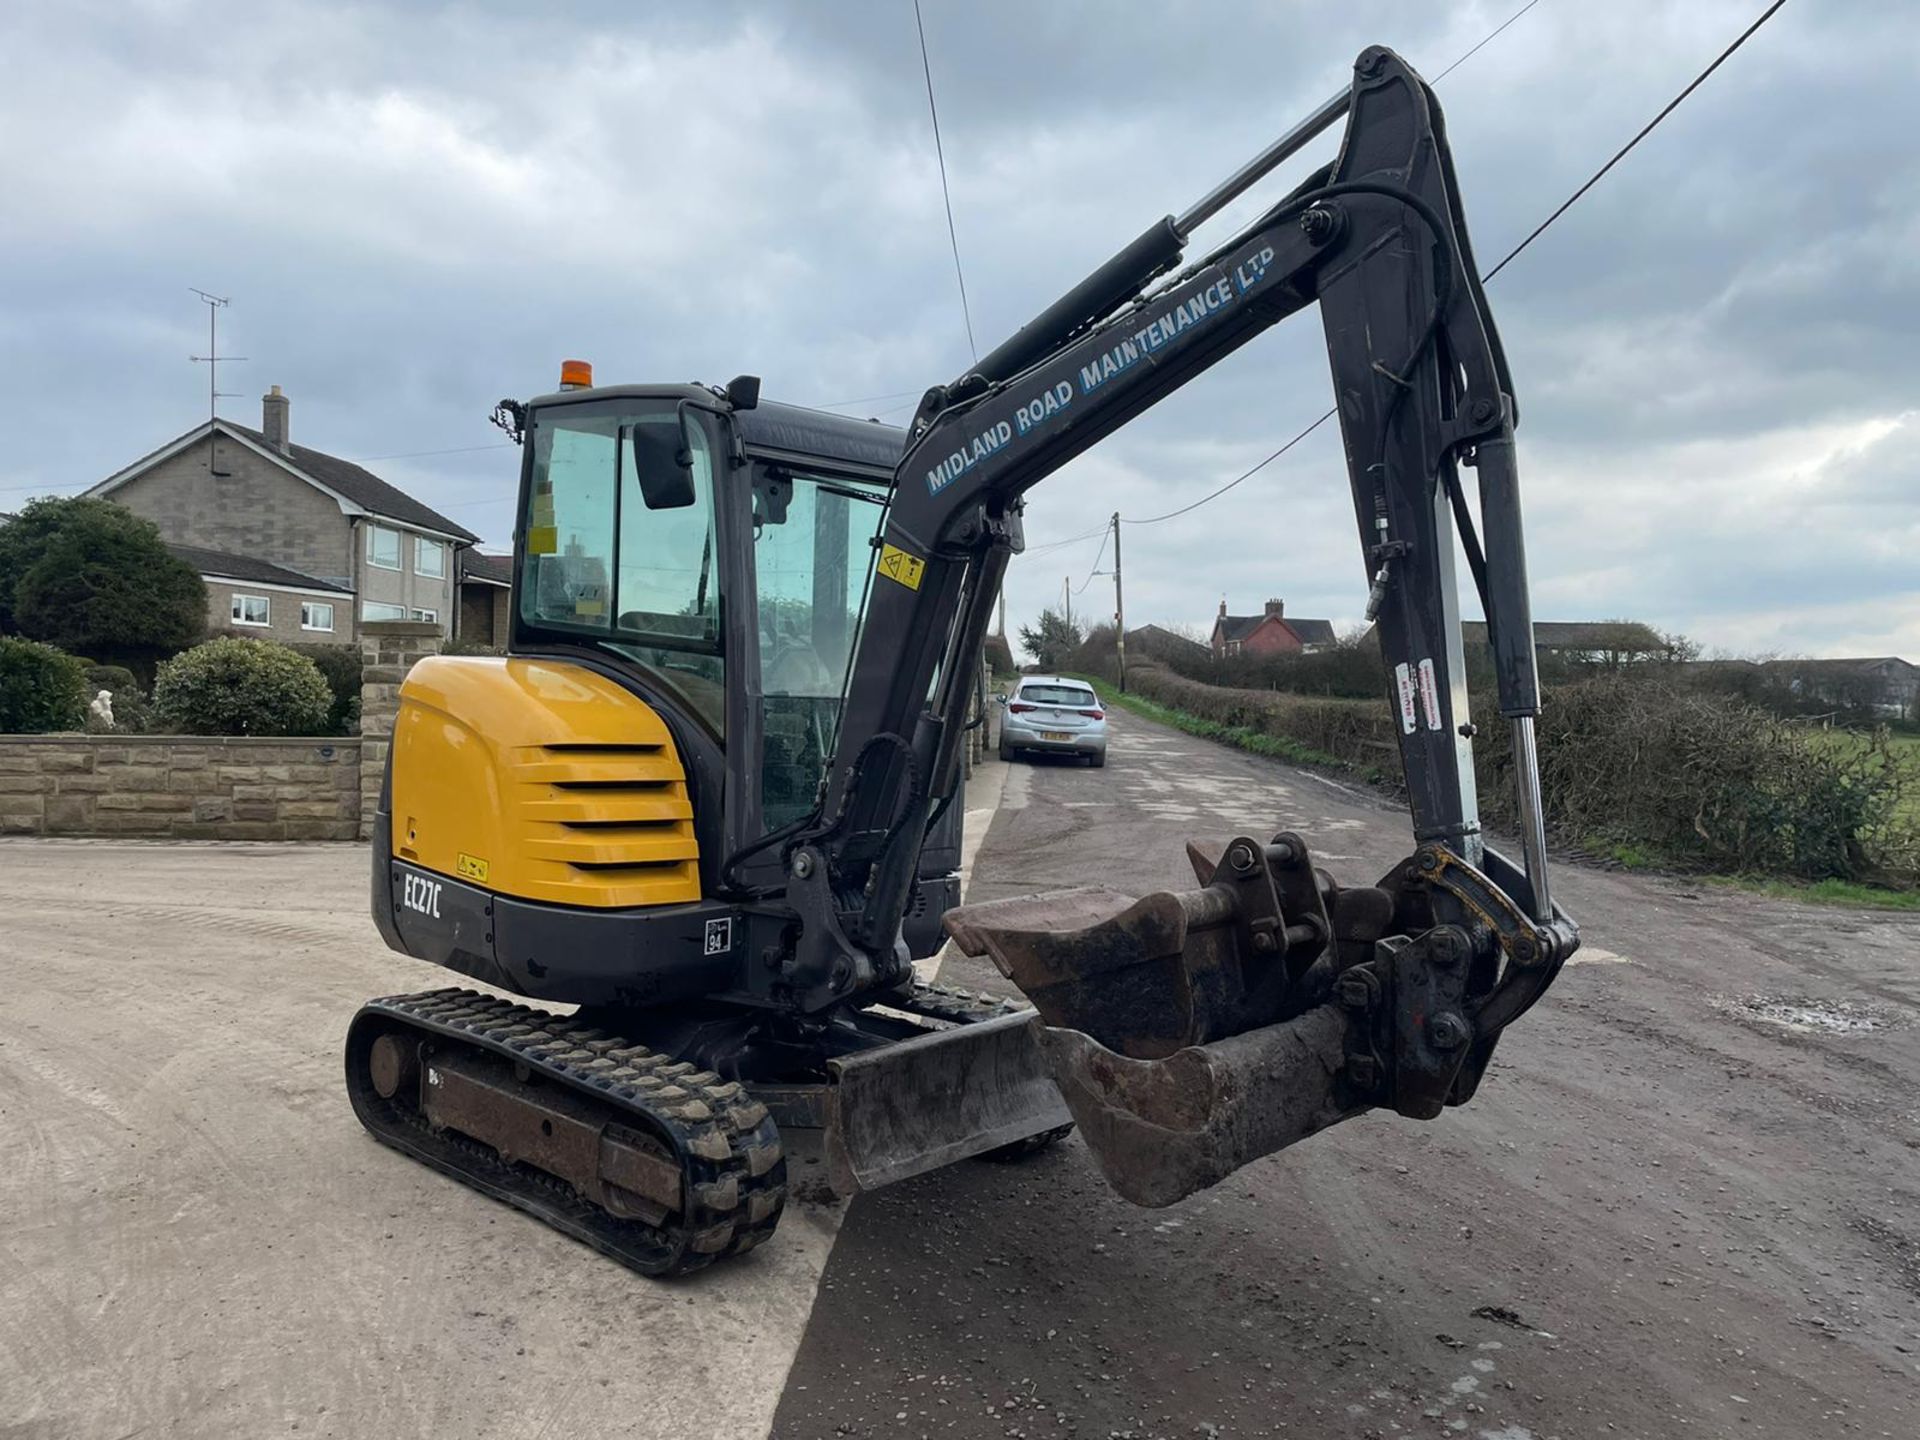 2013 VOLVO EC27C EXCAVATOR RUNS, DRIVES AND DIGS, IN USED BUT GOOD CONDITION, X3 BUCKETS INCLUDED - Image 6 of 8